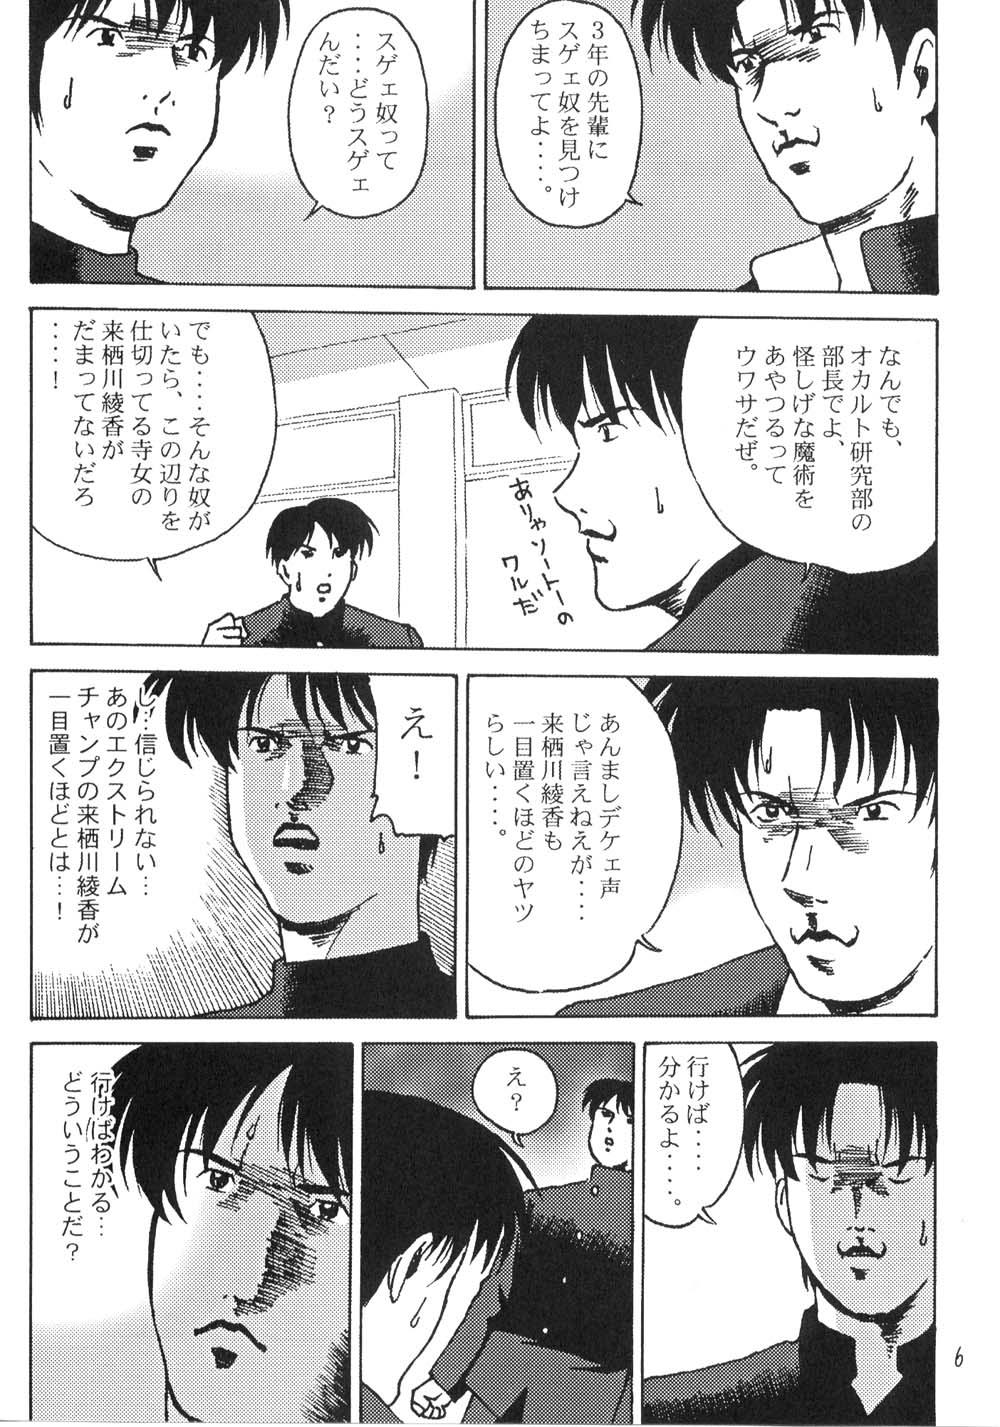 Jap Credit Note Vol. 5 - To heart Comic party Kizuato Teenfuns - Page 5